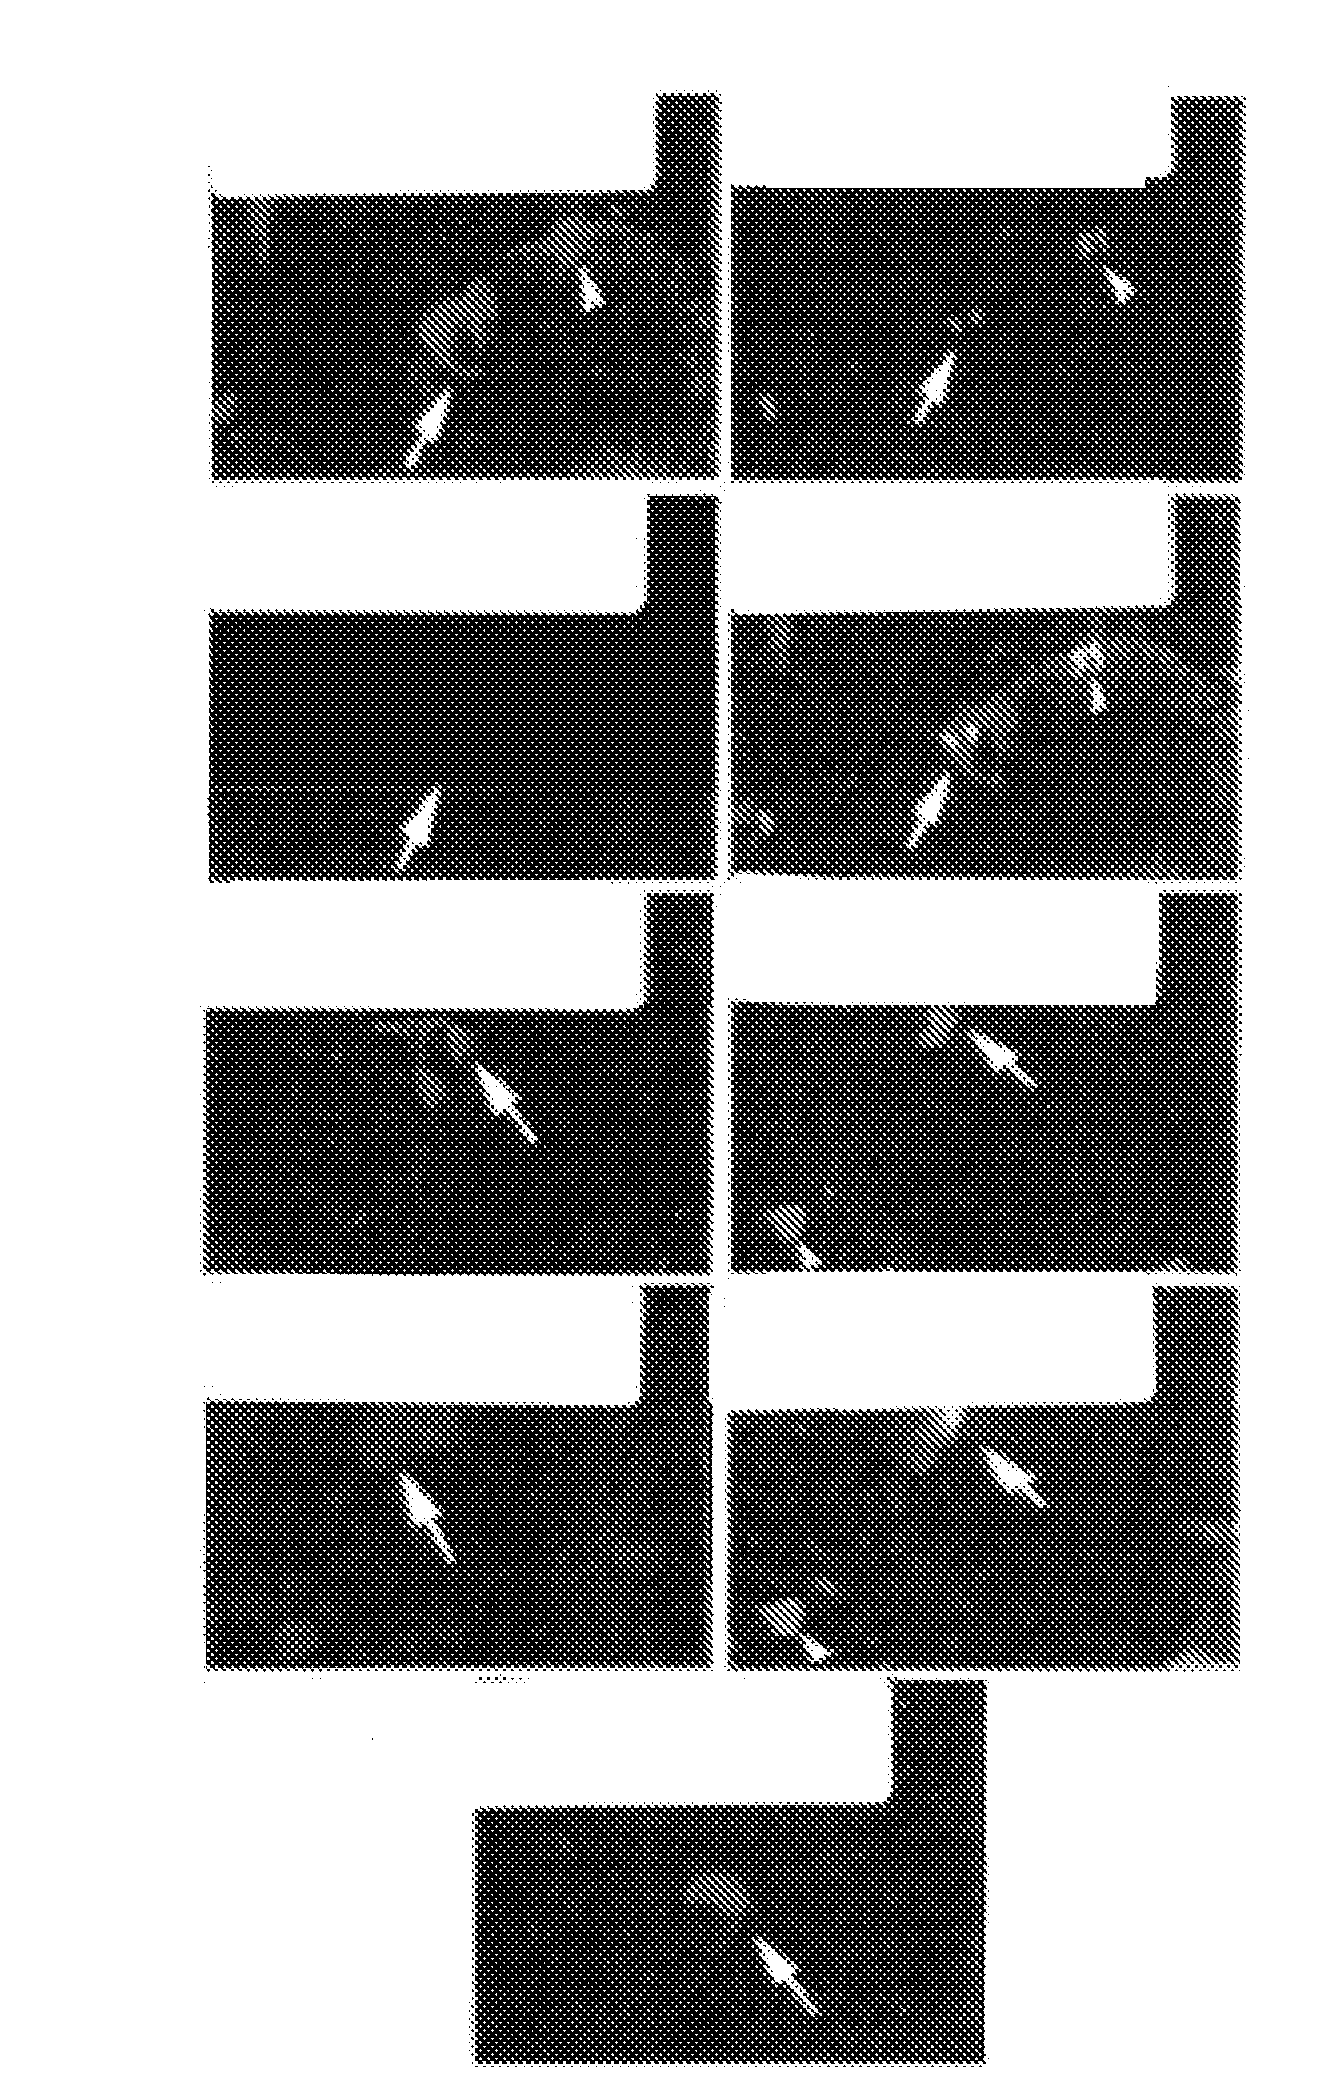 Bone Augmentation Utilizing Muscle-Derived Progenitor Compositions, And Treatments Thereof